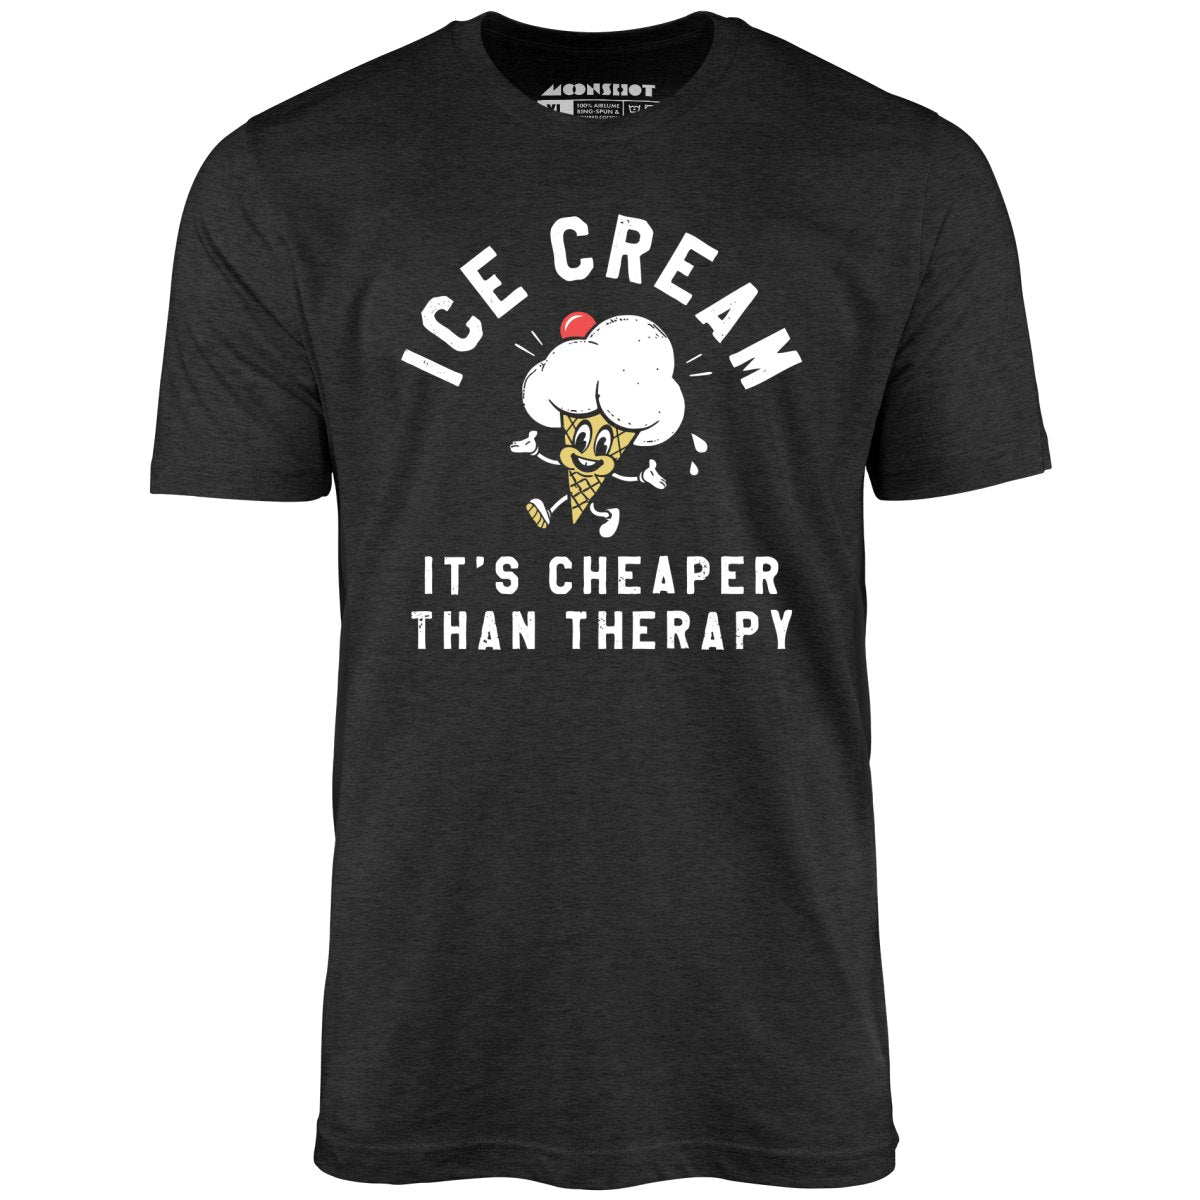 Ice Cream It's Cheaper Than Therapy - Unisex T-Shirt